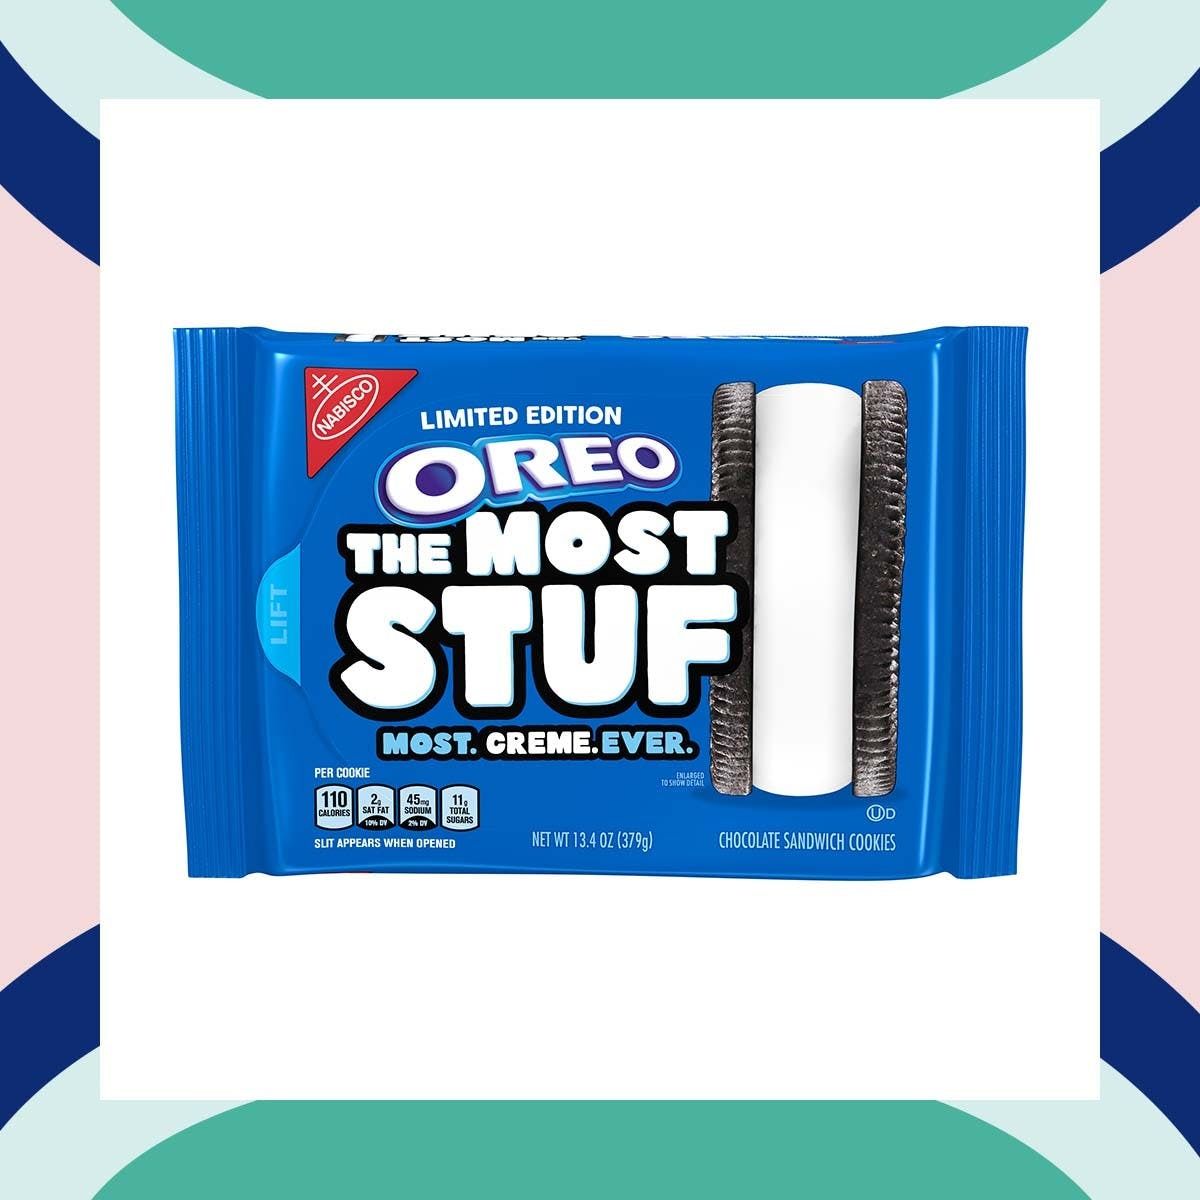 Oreo Fans, Prepare Your Loving Hearts for This Insanely Good Swag